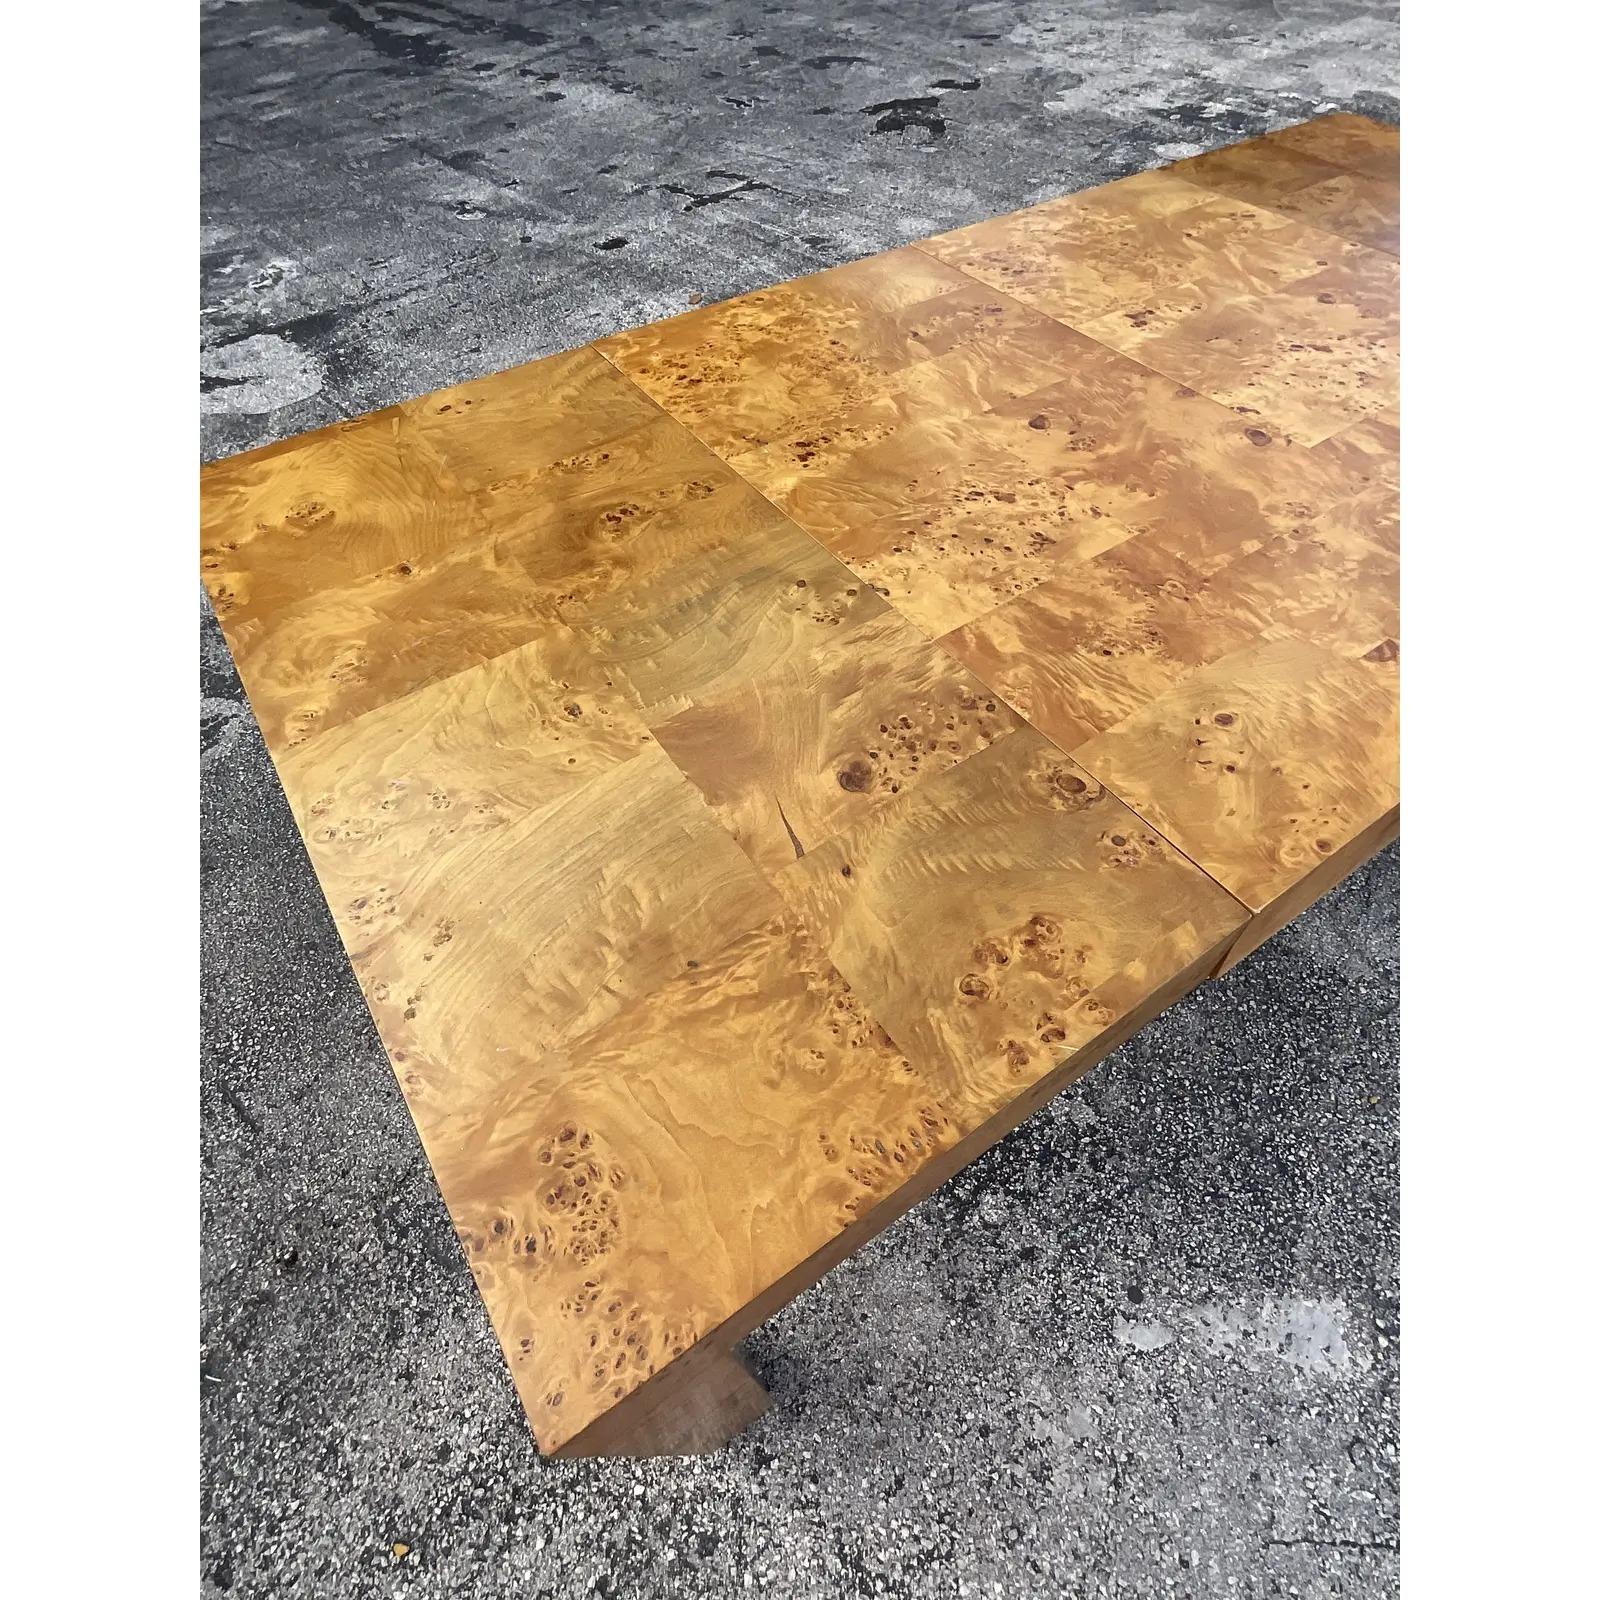 Vintage Midcentury Patchwork Burl Wood Parsons Dining Table After Milo Baughman In Good Condition For Sale In west palm beach, FL